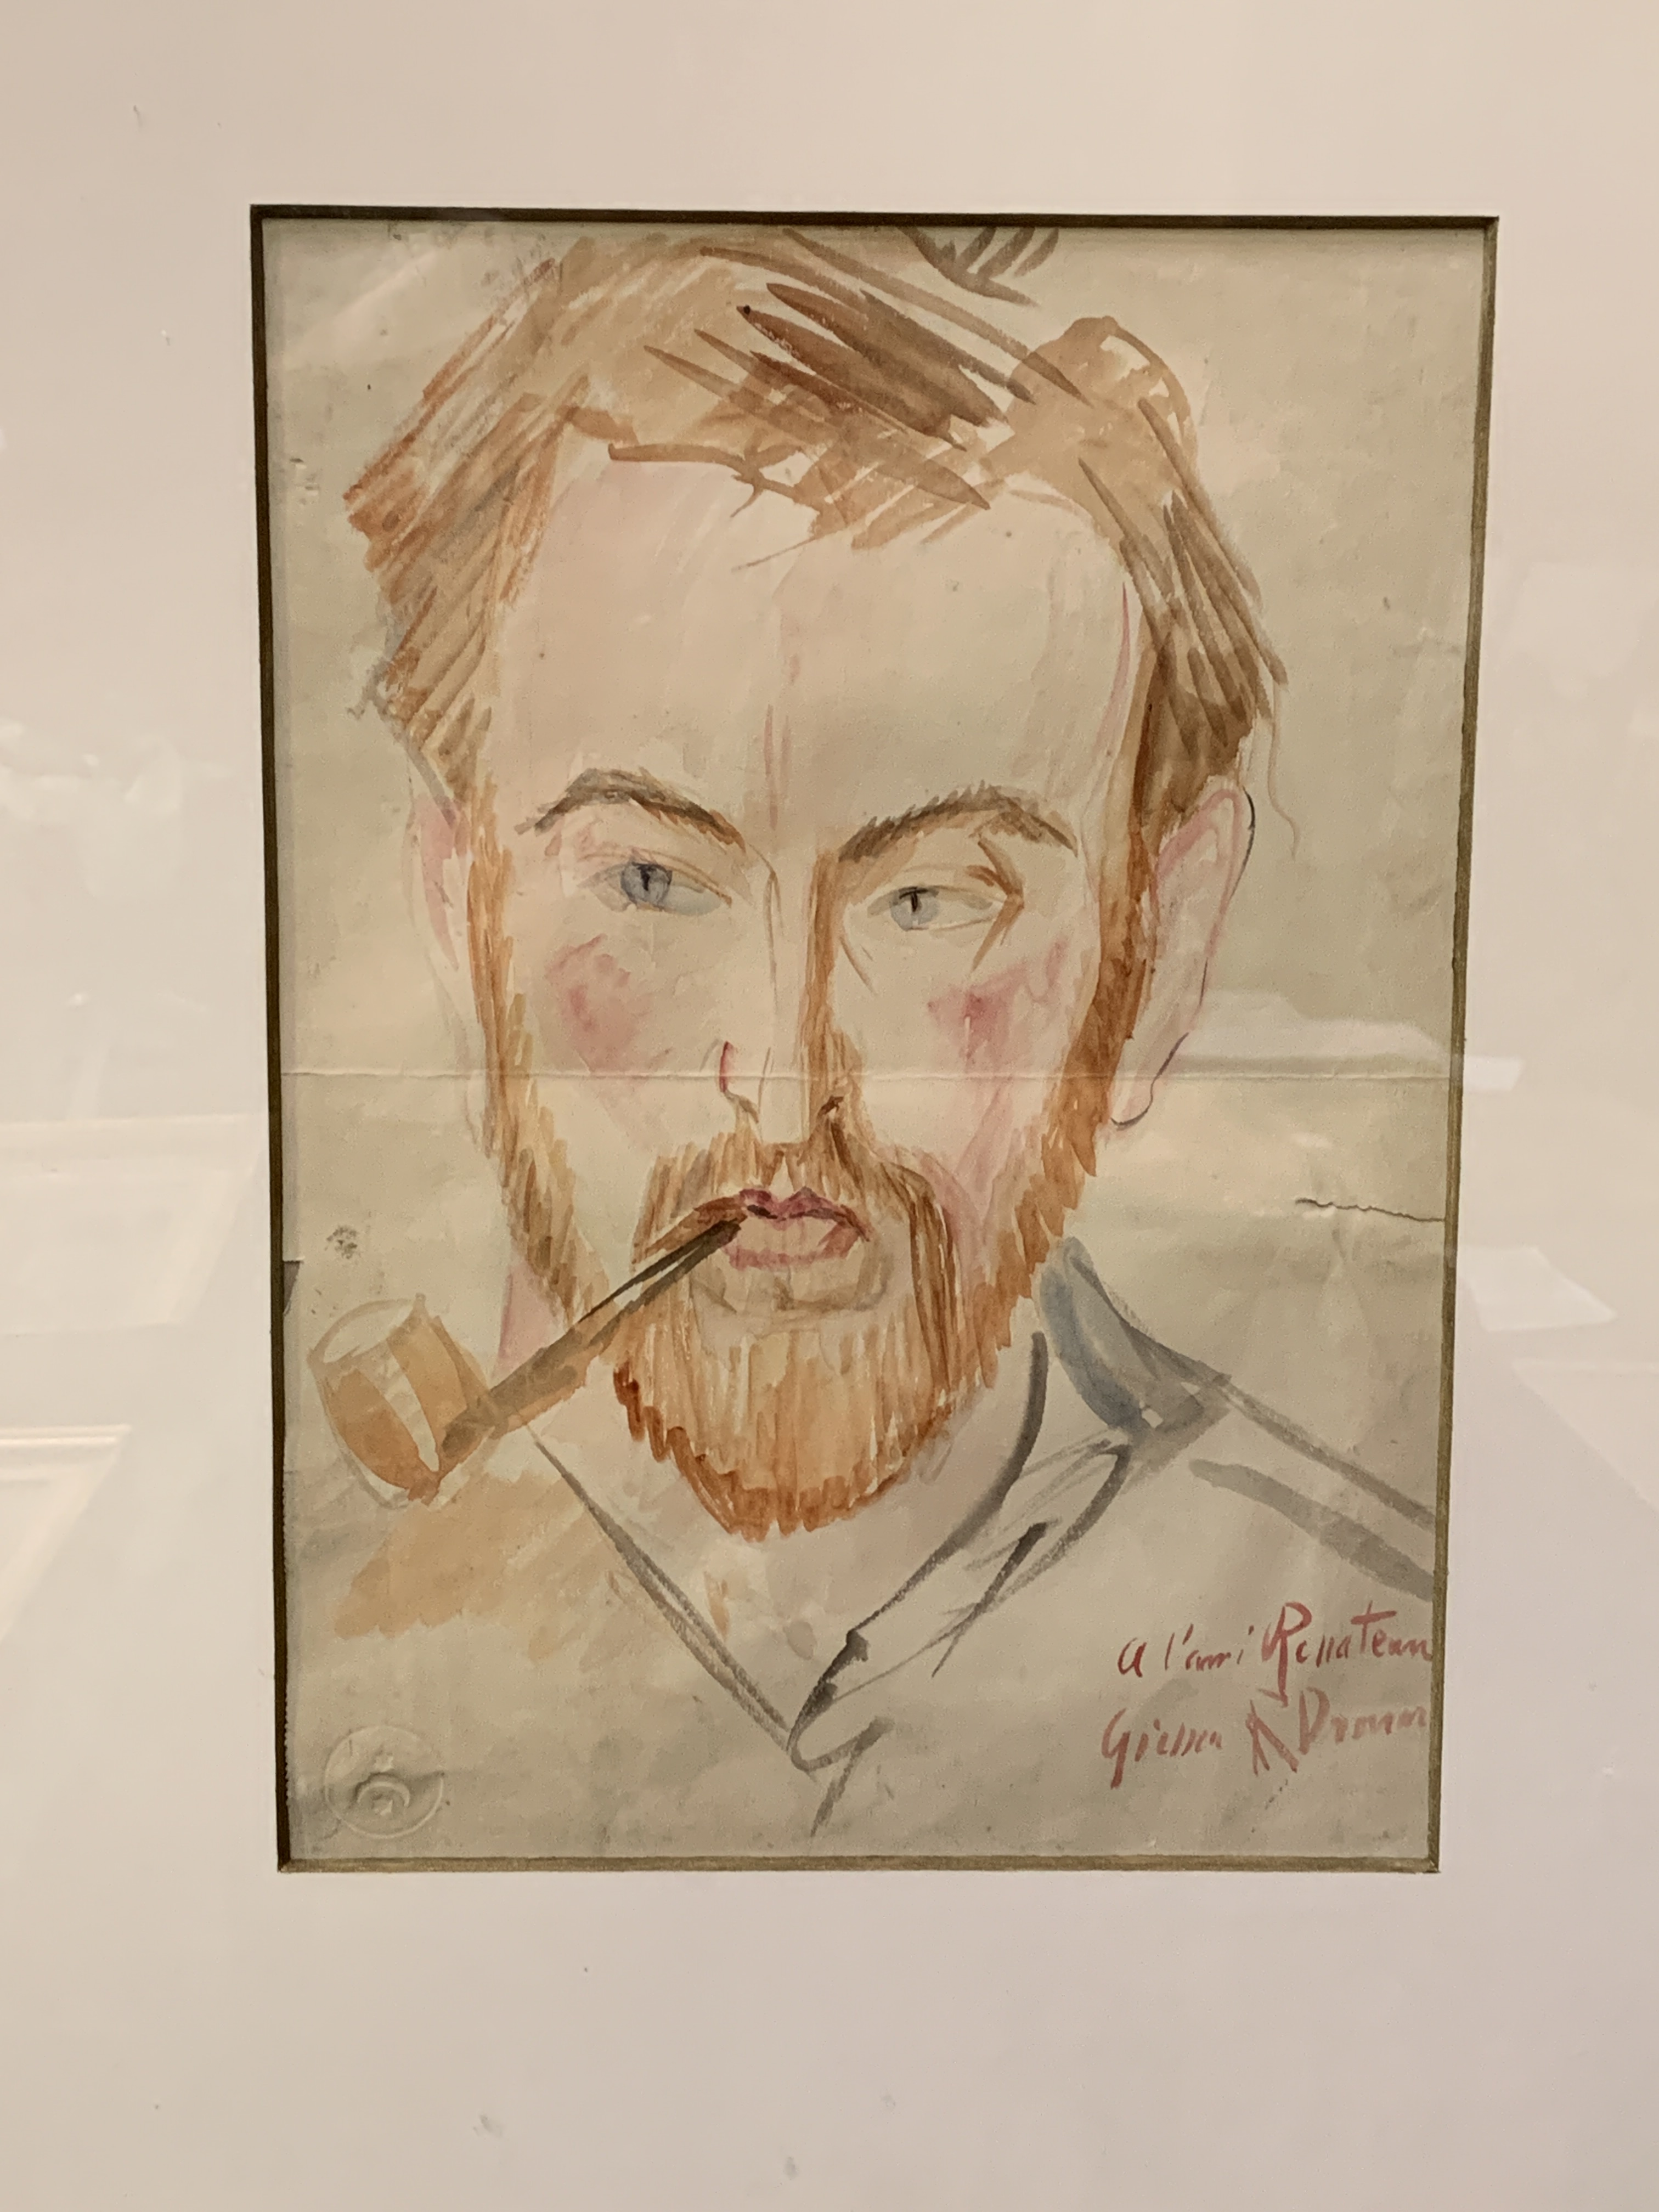 Framed and glazed watercolour portrait signed "A l'ami Renateau, Giessen, R Drouart" - Image 2 of 3